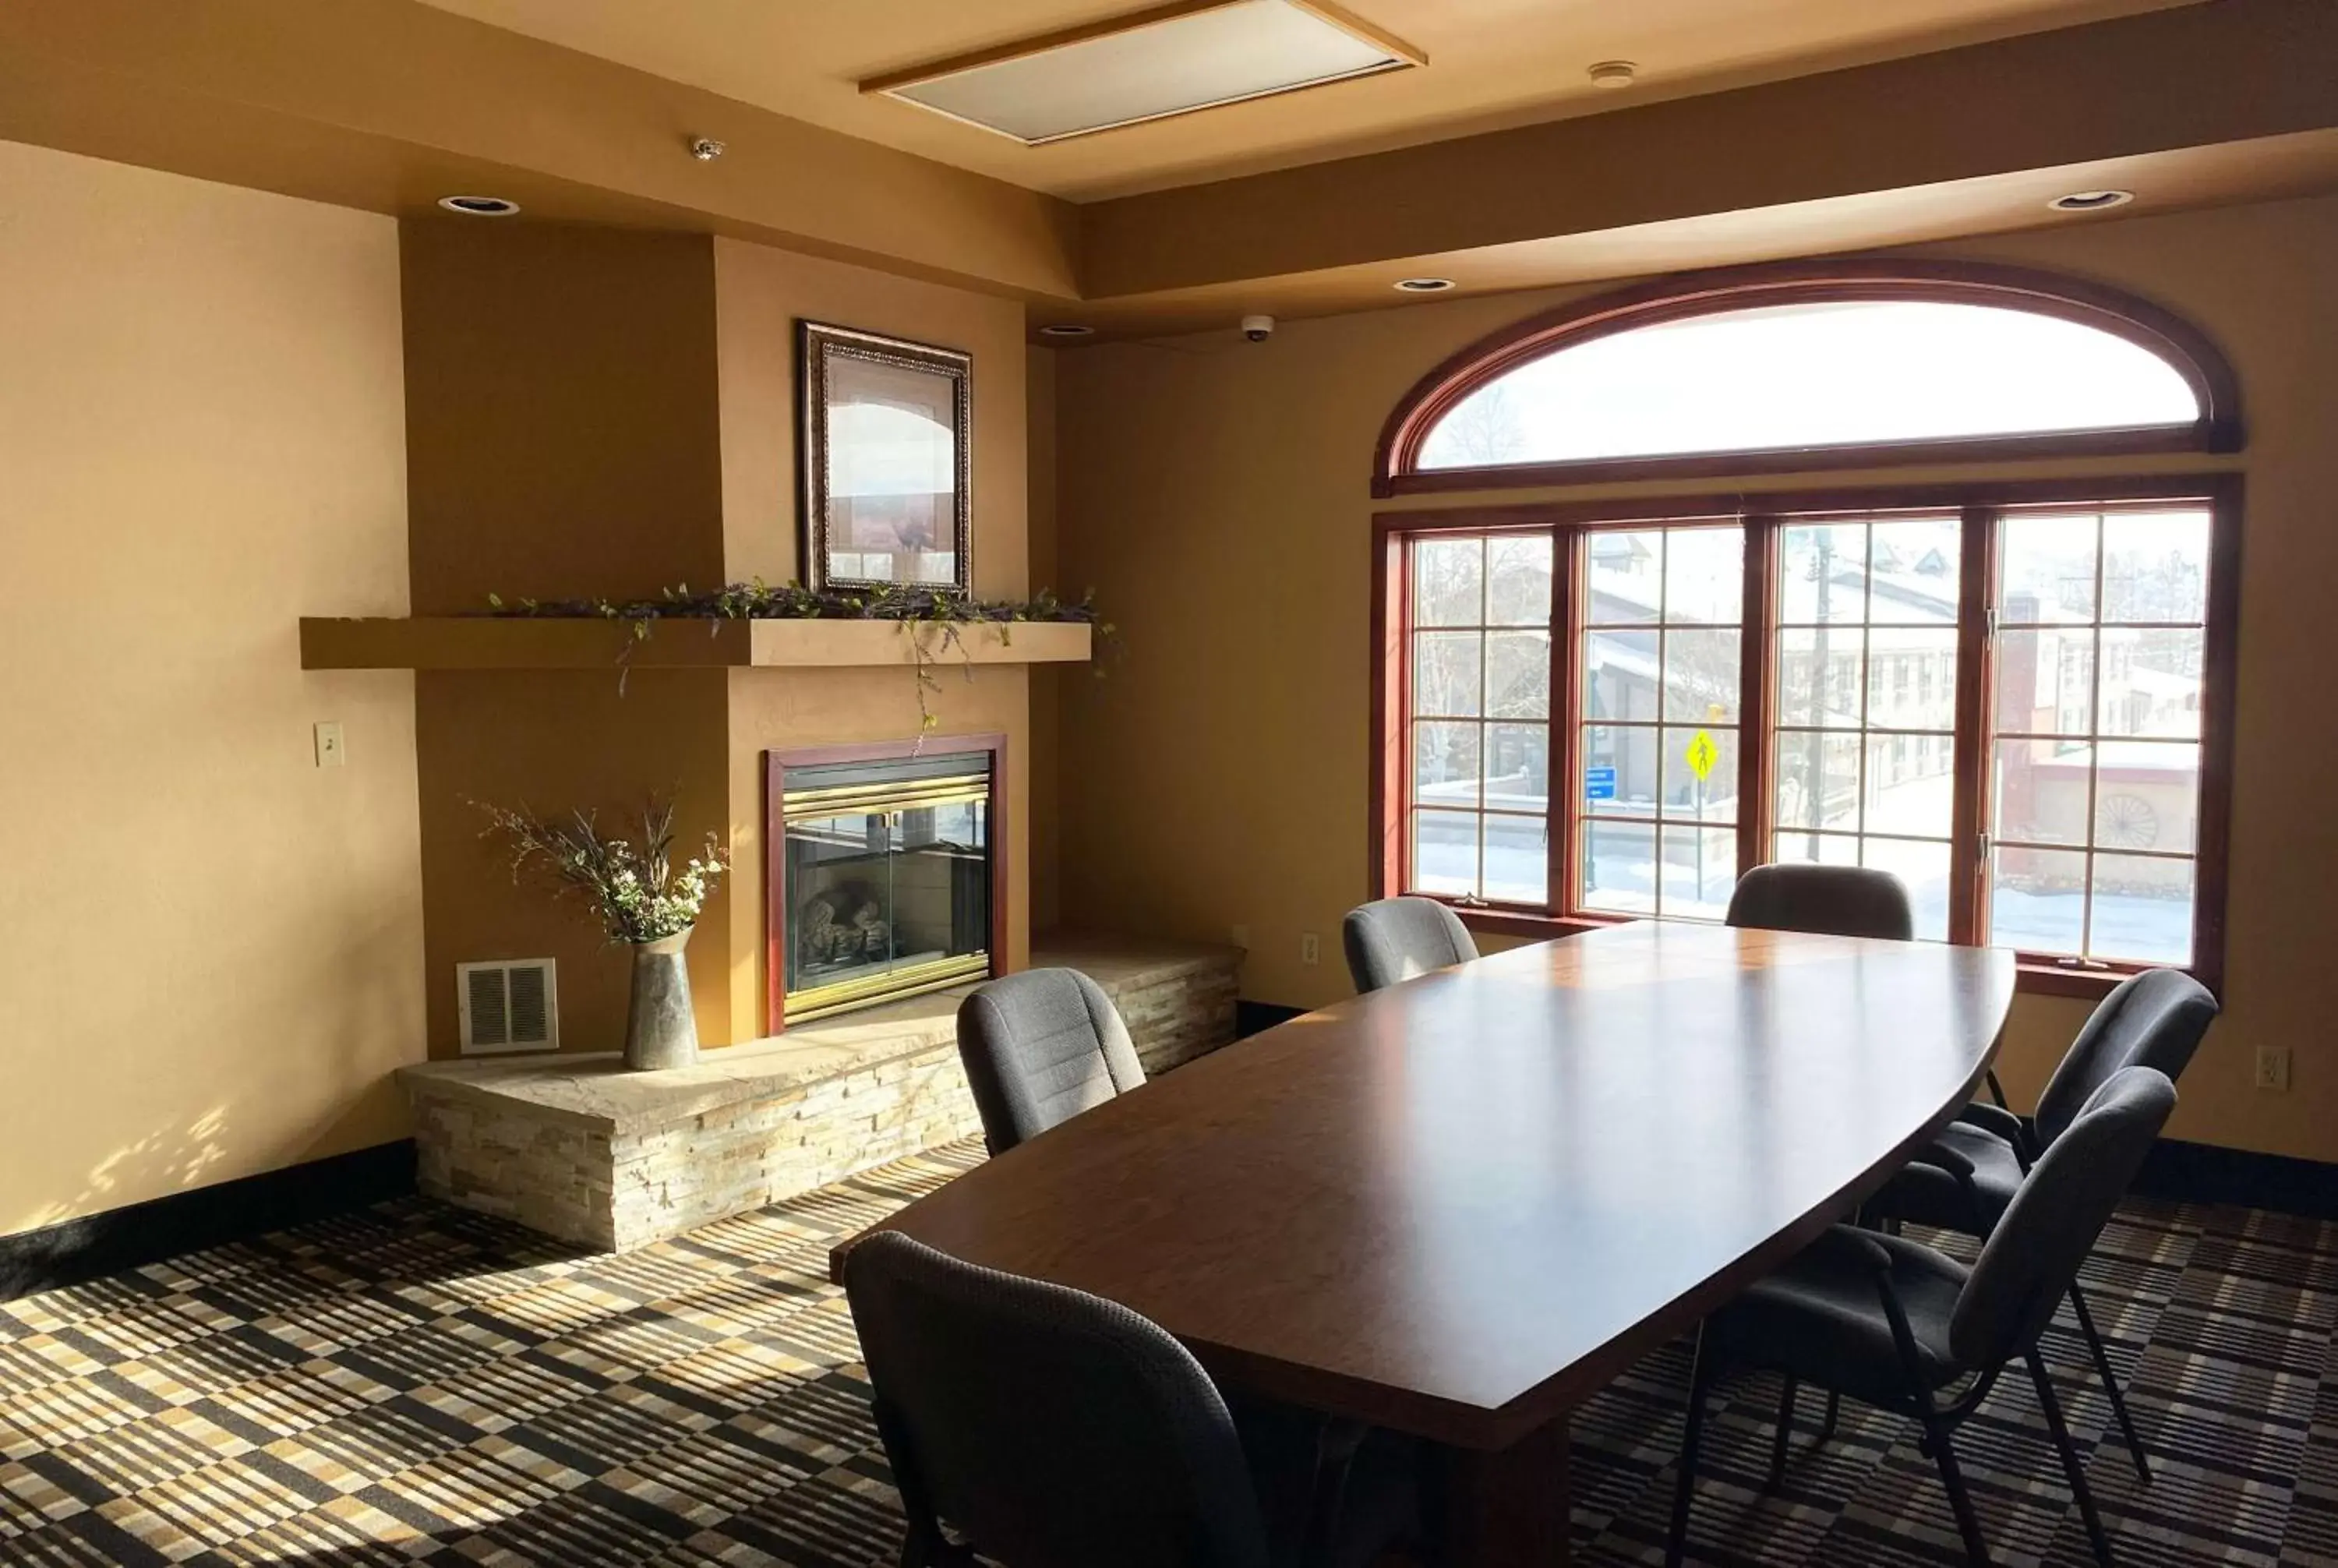 Meeting/conference room in Wingate by Wyndham Gunnison Near Western Colorado University